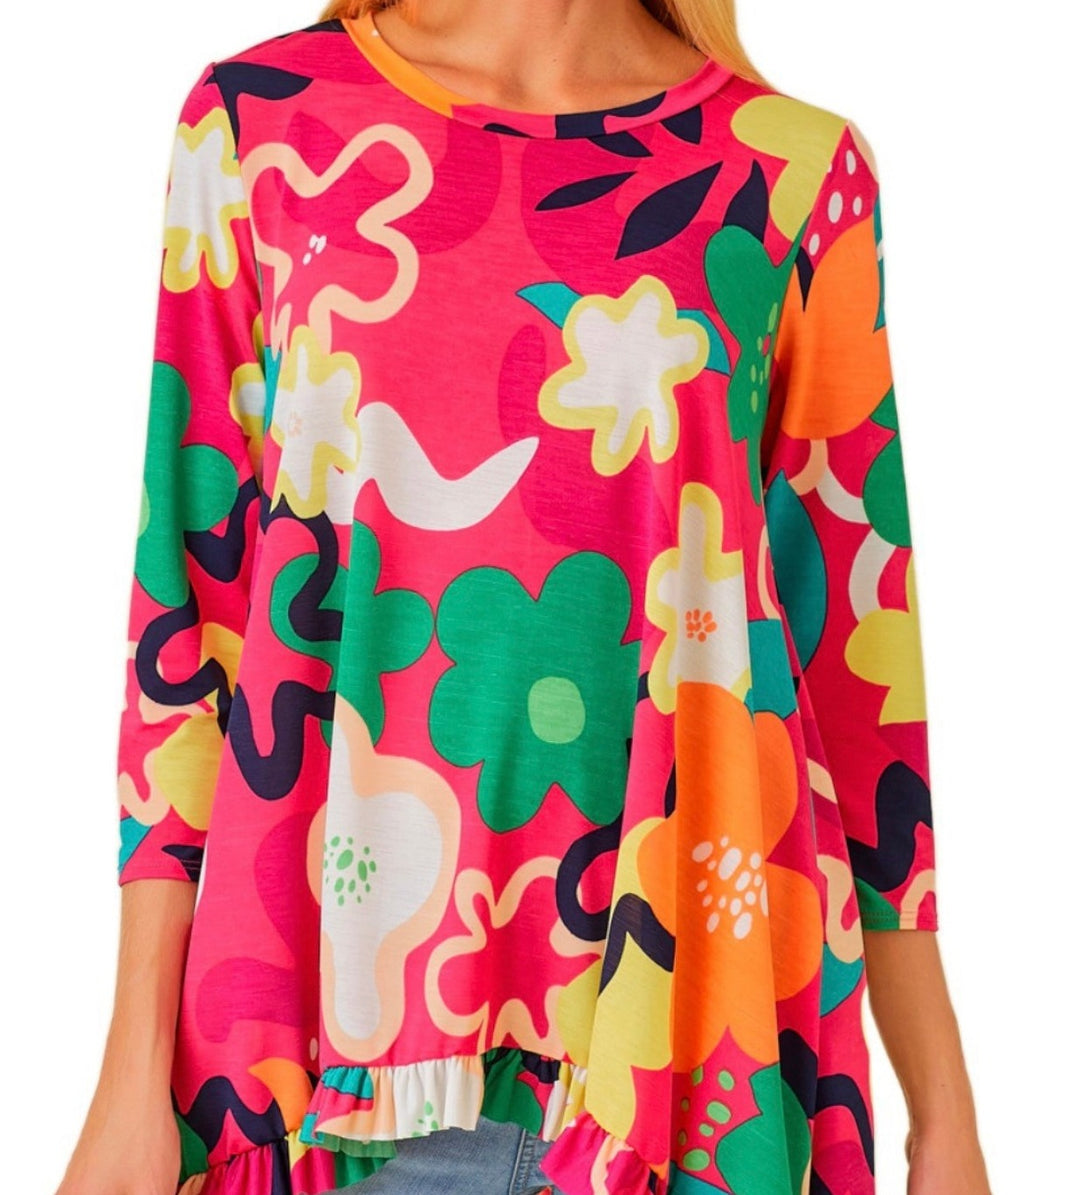 Women’s Asymmetrical Top Pink Floral Tunic Top with Ruffle